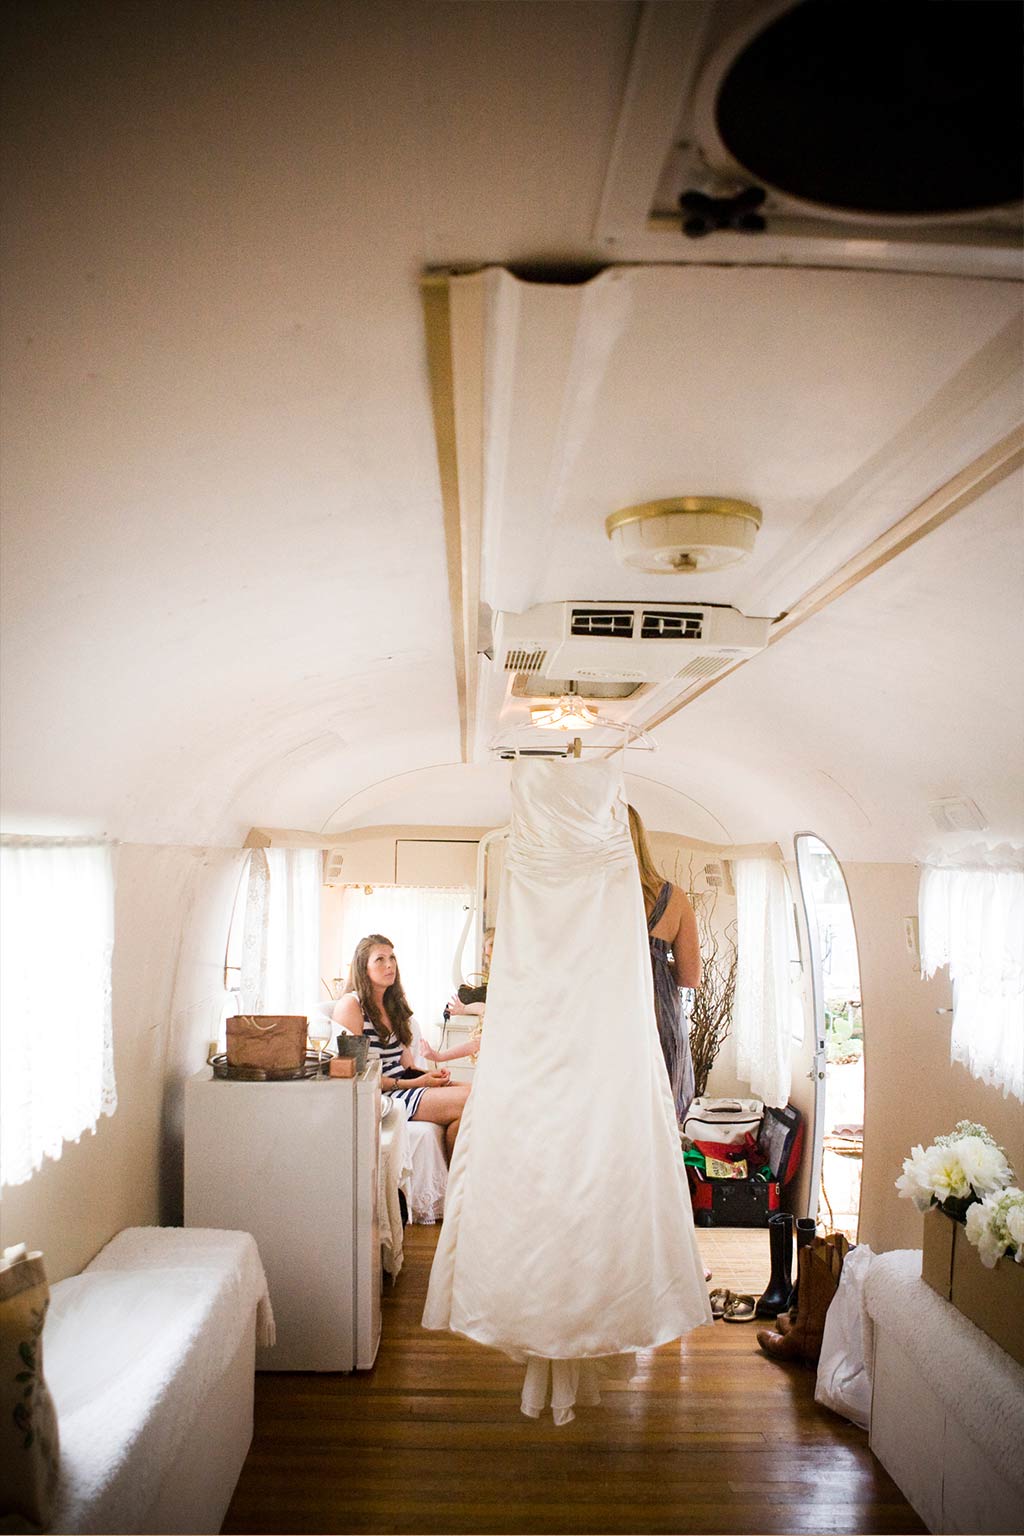 Bride getting ready in airstream trailer at Texas Hill Country wedding ceremony near Austin, Texas